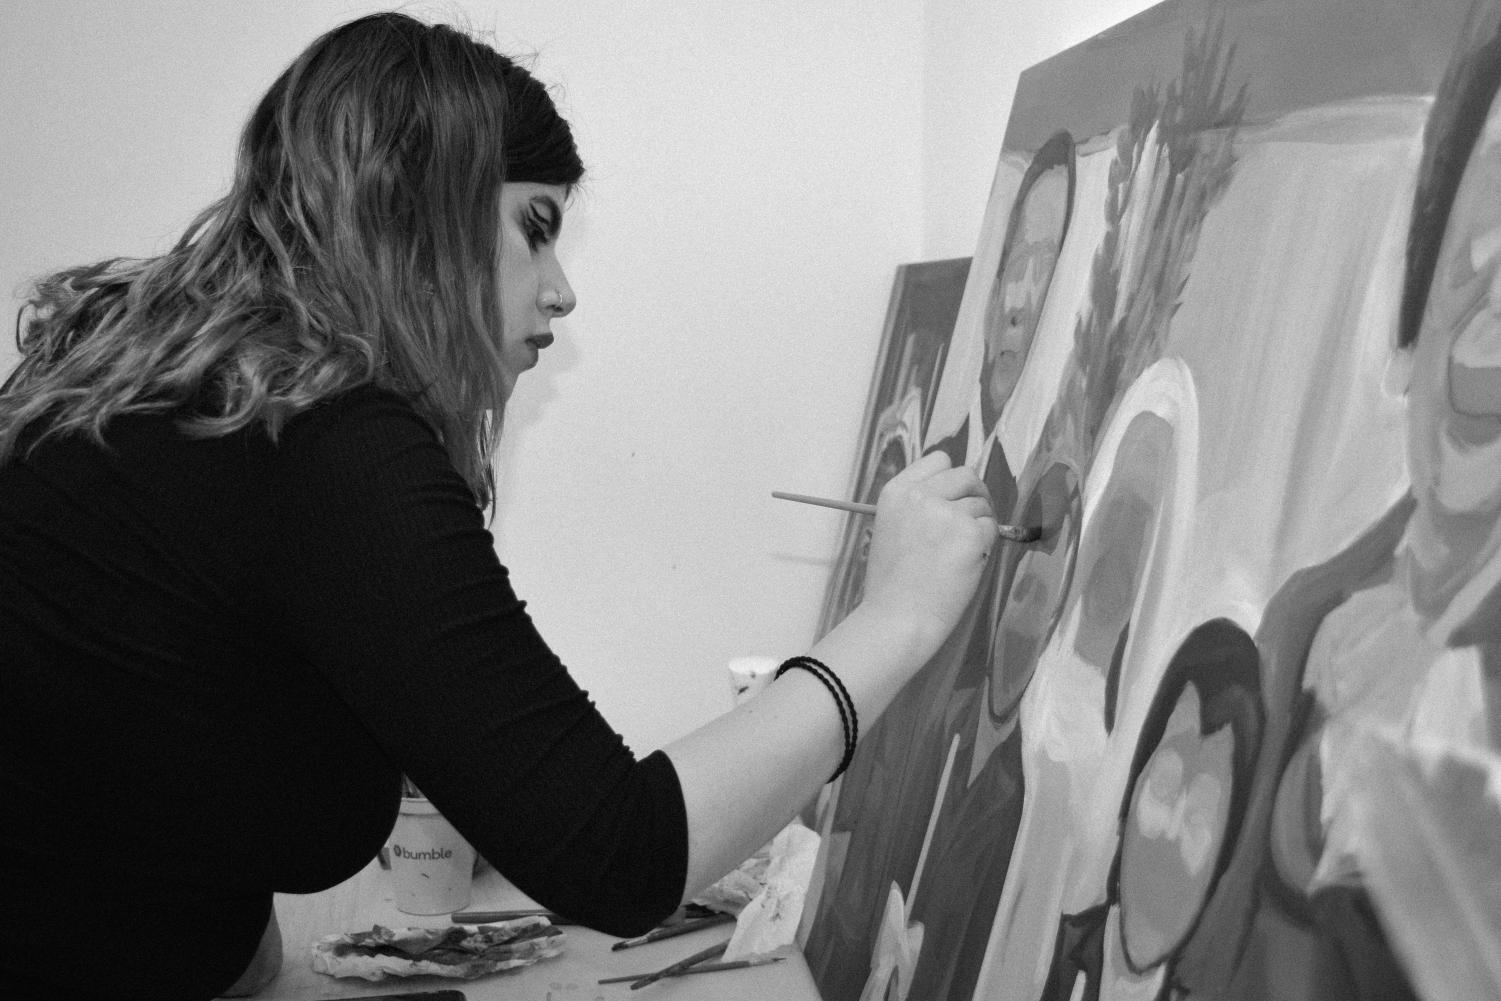 A black-and-white image of a female college student with medium-length, slightly curly hair, a dark long-sleeved top, and hair ties on her right wrist. She is holding up a paintbrush in her right hand to a canvas with an in-progress painting of multiple faceless figures.